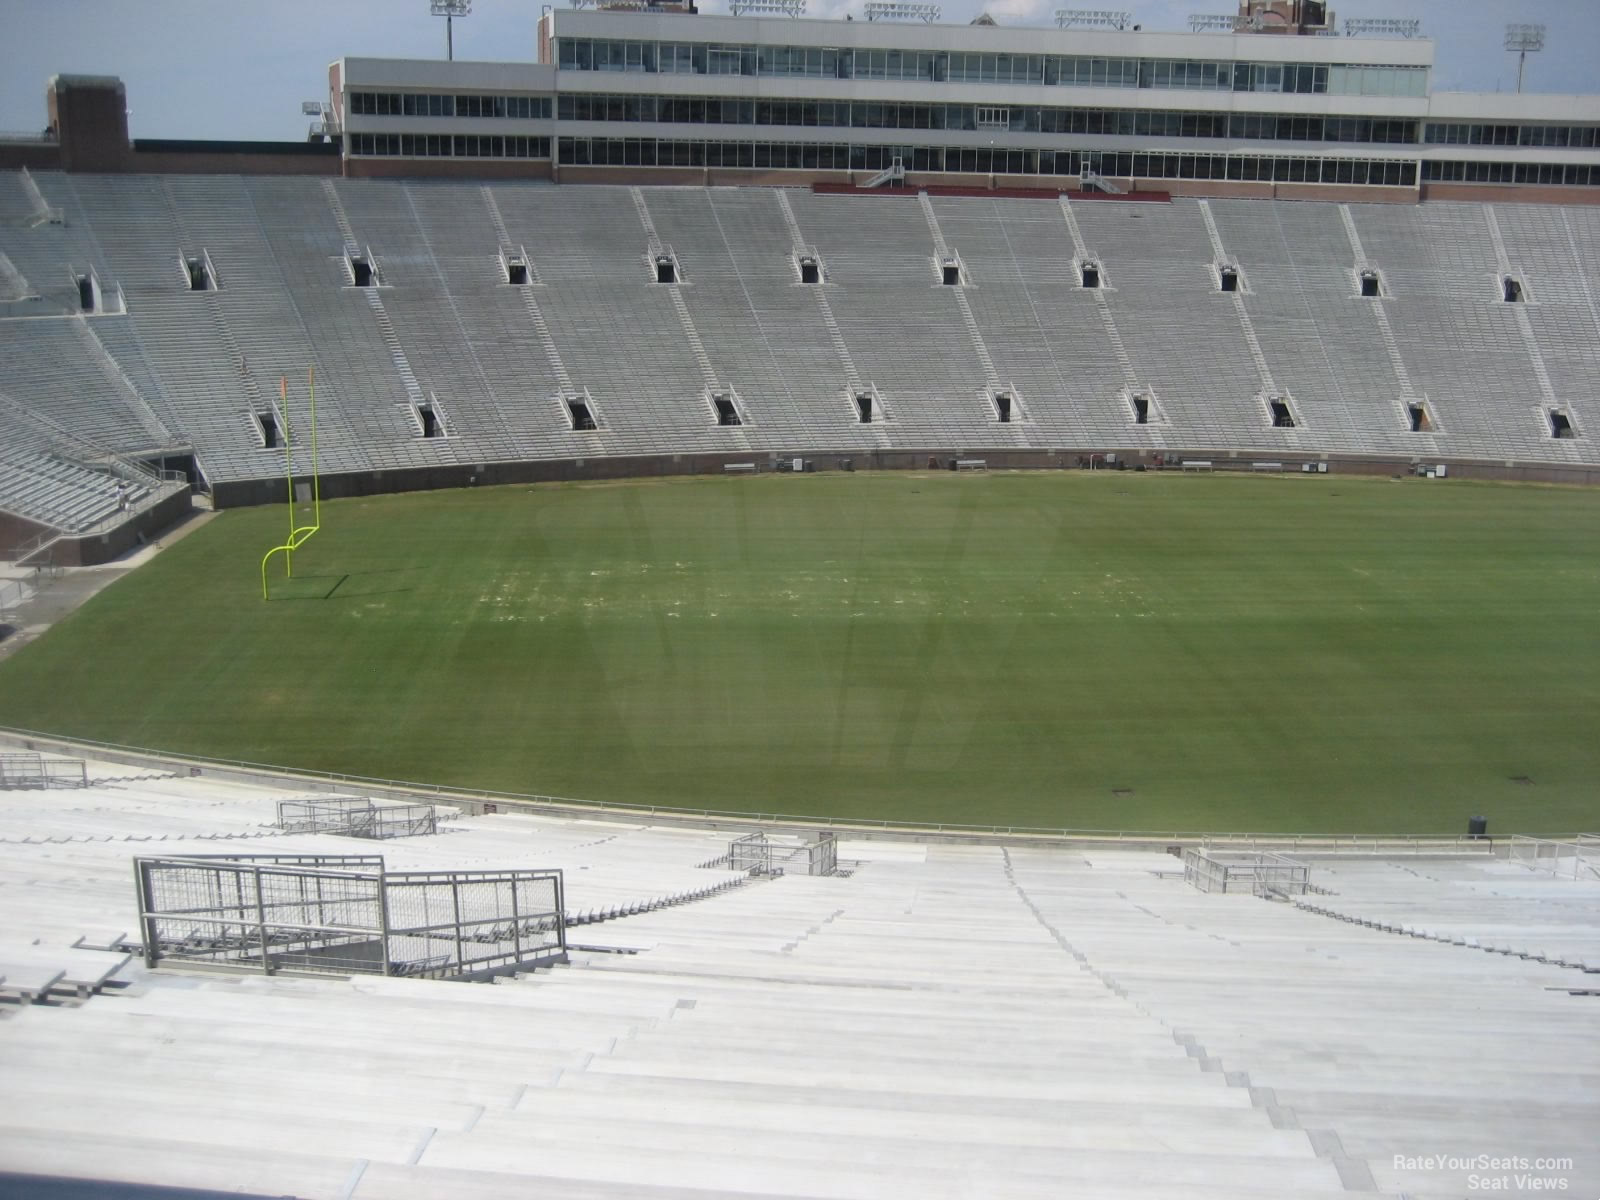 section 12, row 77 seat view  - doak campbell stadium